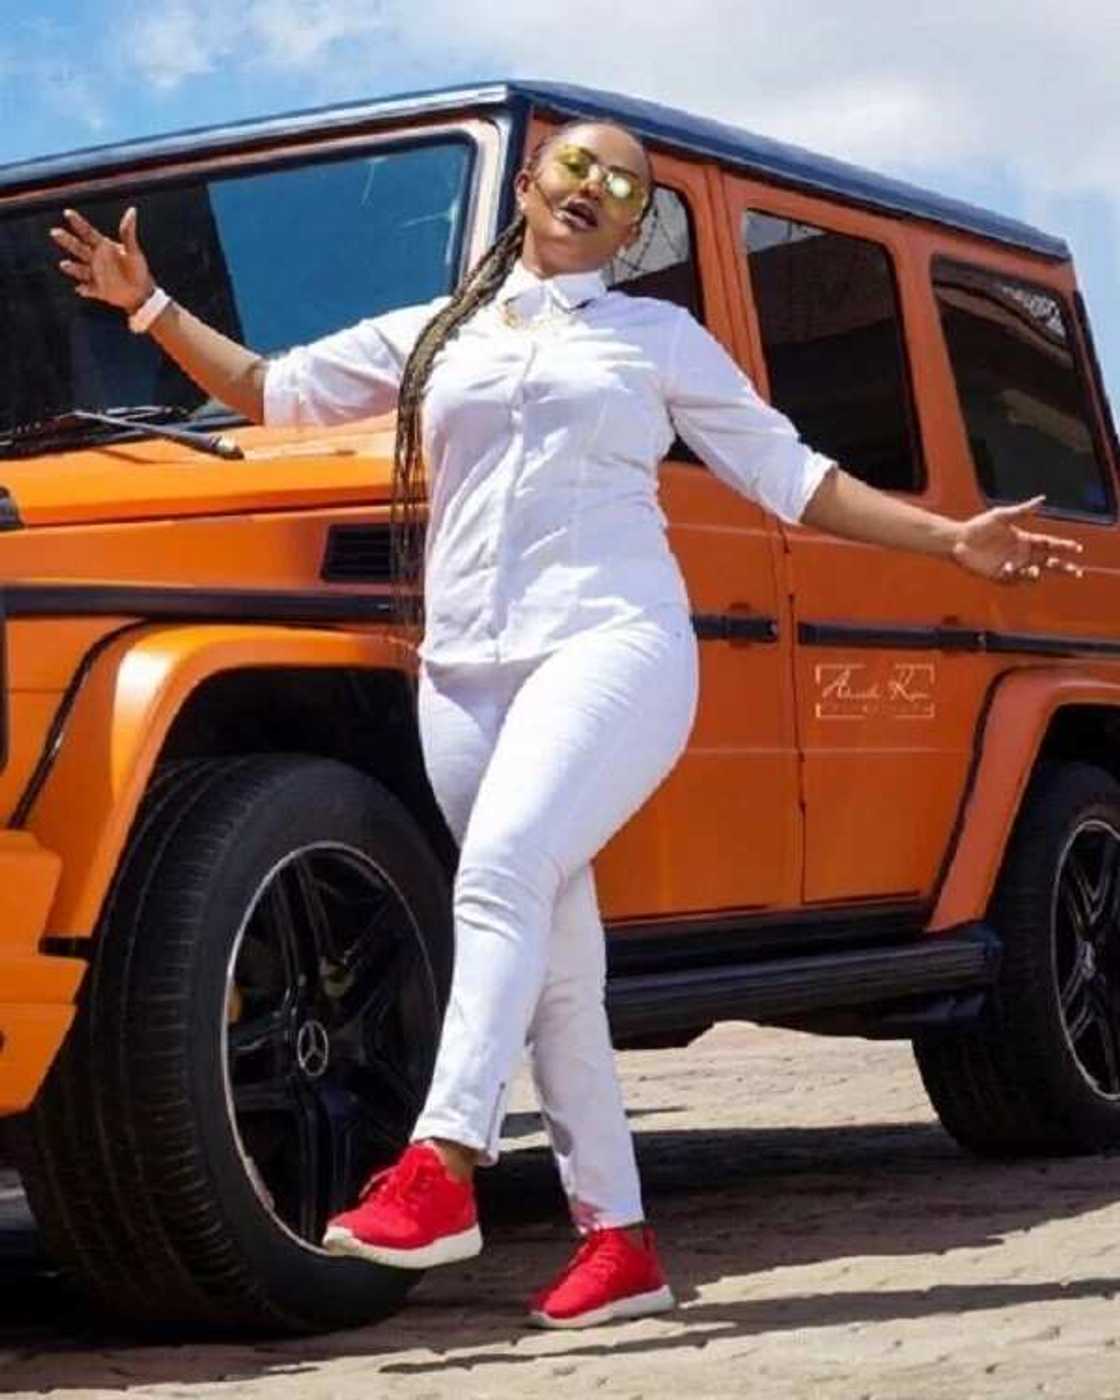 Nana Ama McBrown in a white outfit and red shoes standing in front of an orange jeep